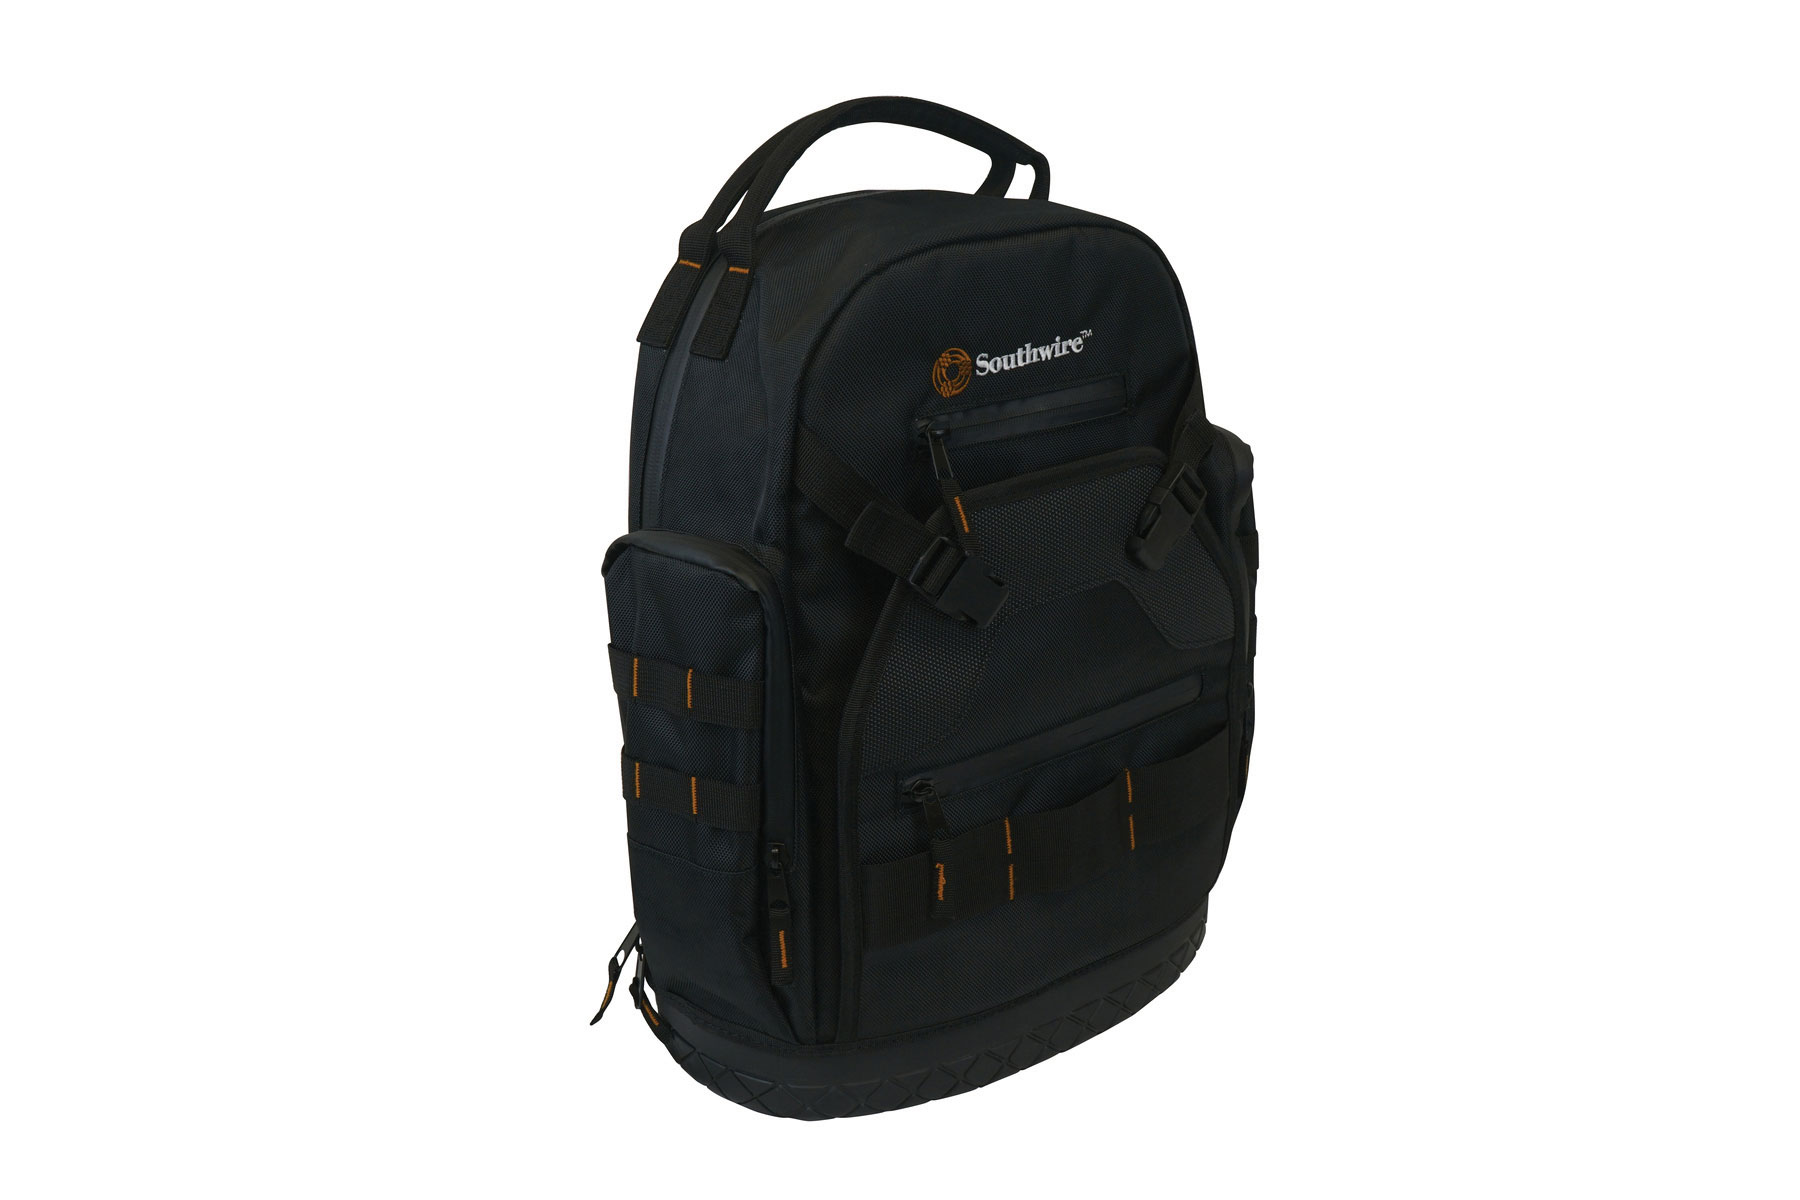 Black backpack with orange details and Southwire logo. Image by Southwire.